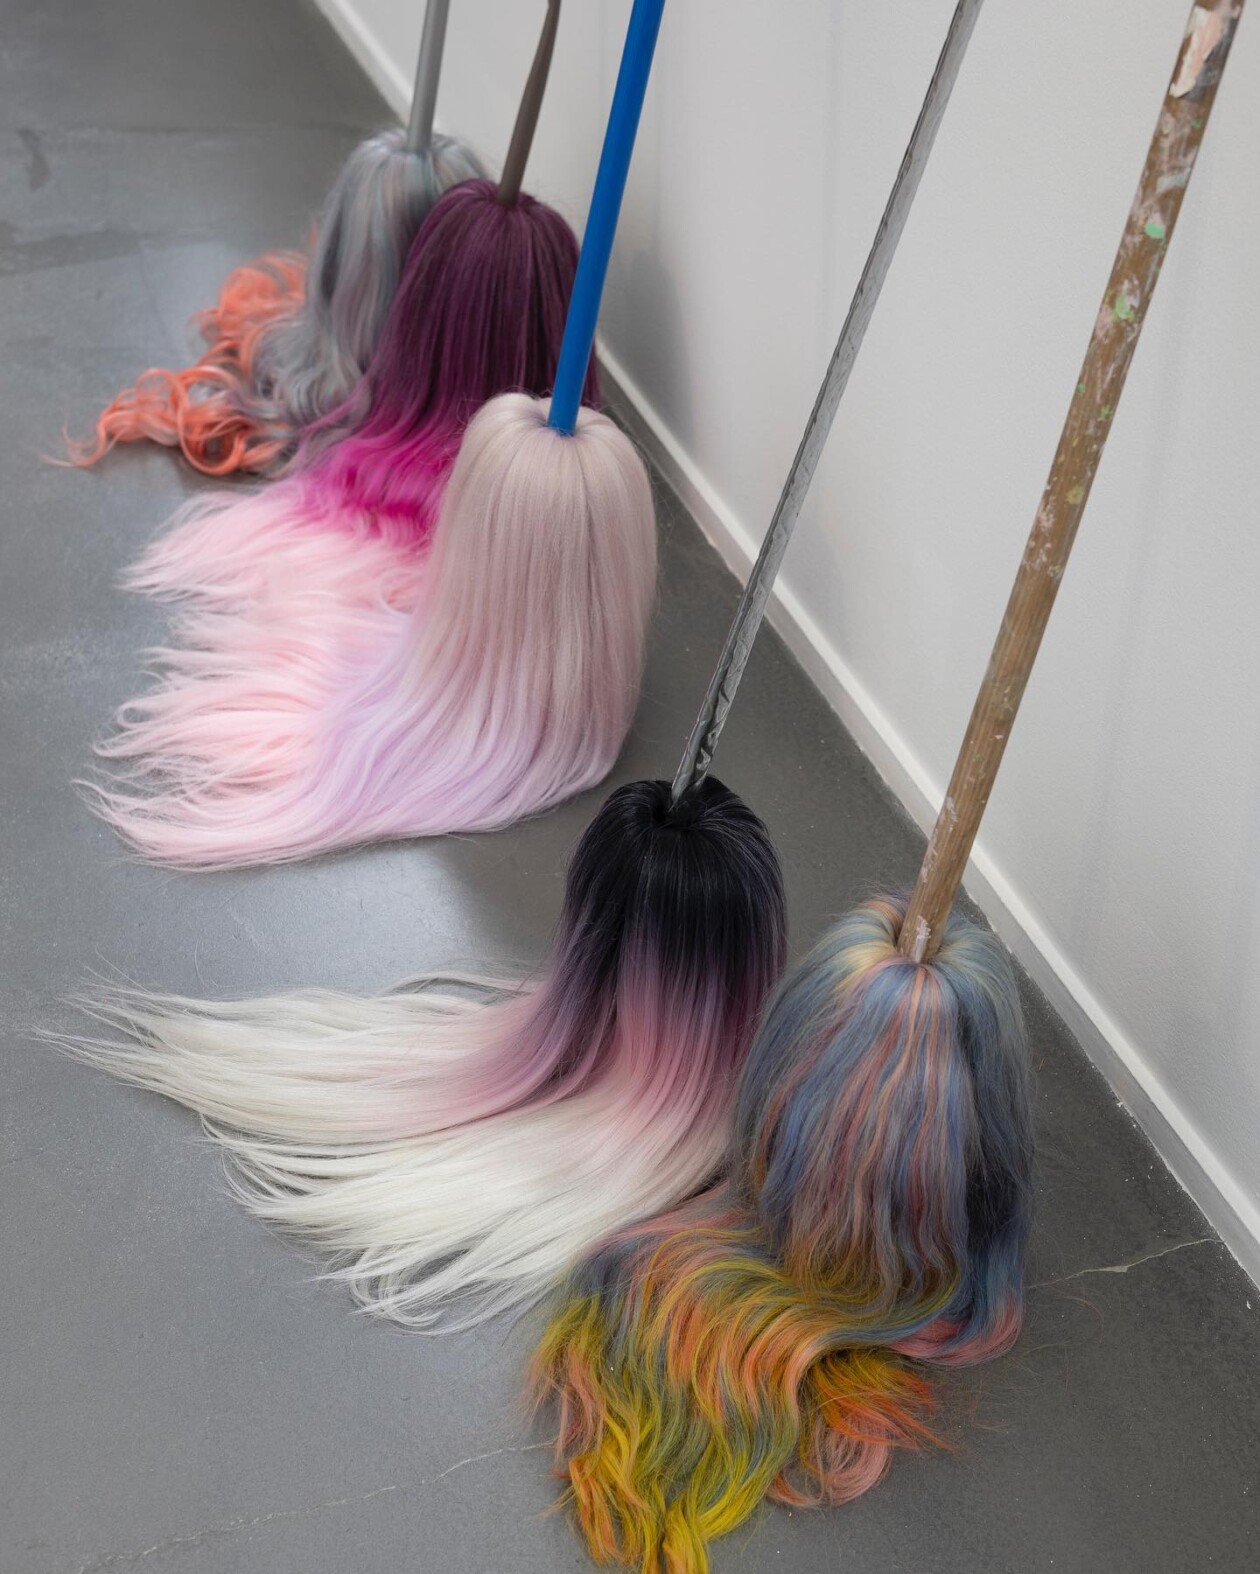 After The Waves (the Waifs) Surreal Sculptures Of Brooms With Human Hairs By Vincent Olinet (2)